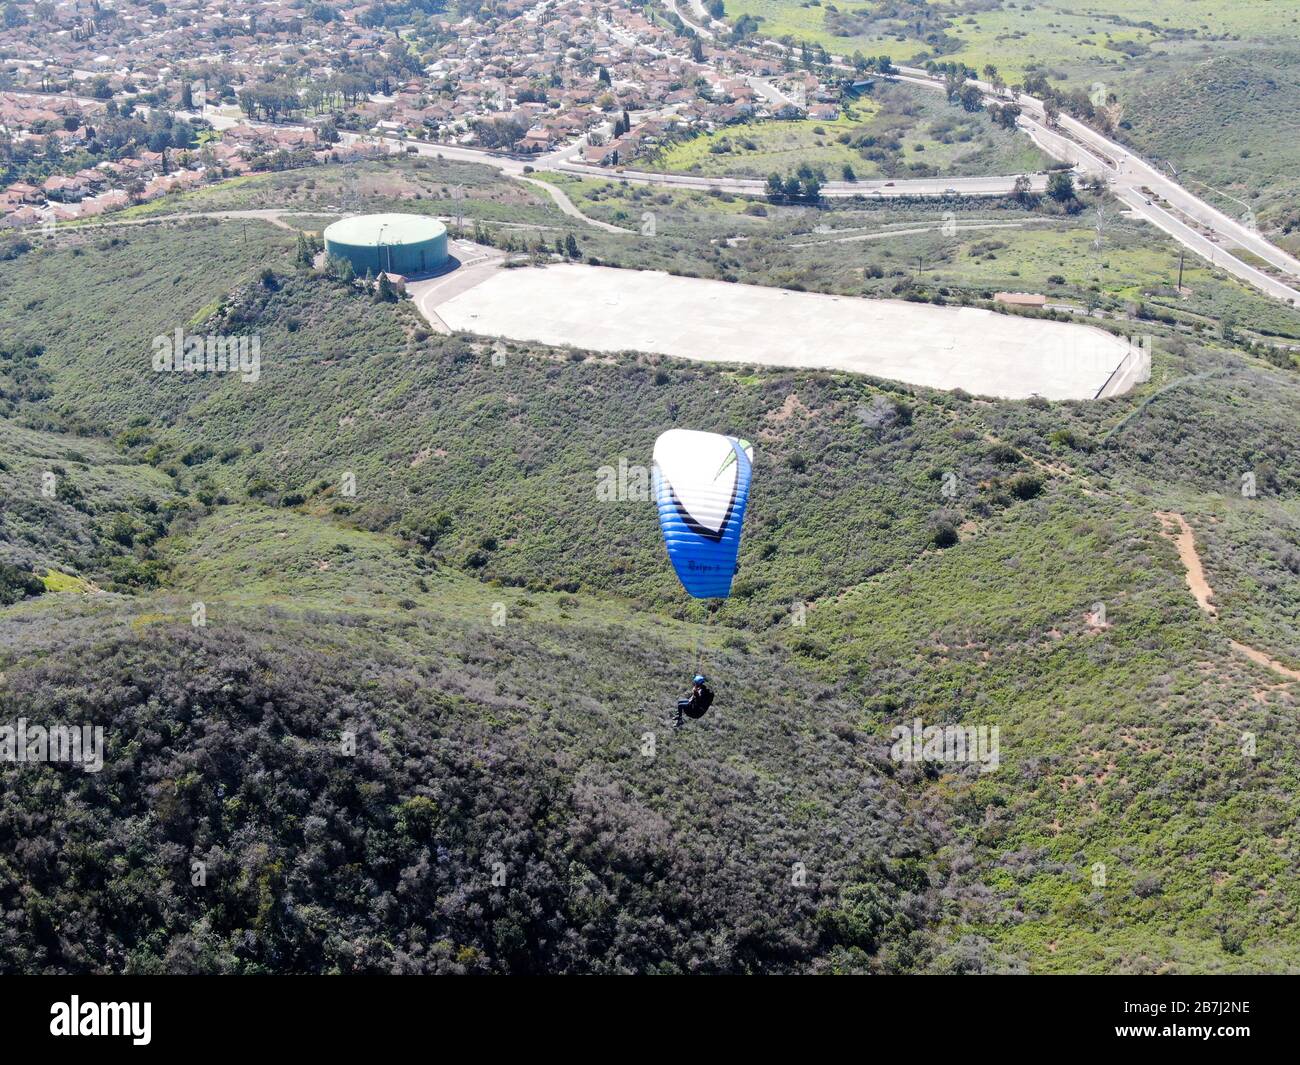 Para-glider over the top of the mountain during summer sunny day. Para-glider on the para-plane, strops -soaring flight moment flying over Black Mountain in San Diego, California. USA. February 22nd, 2020 Stock Photo